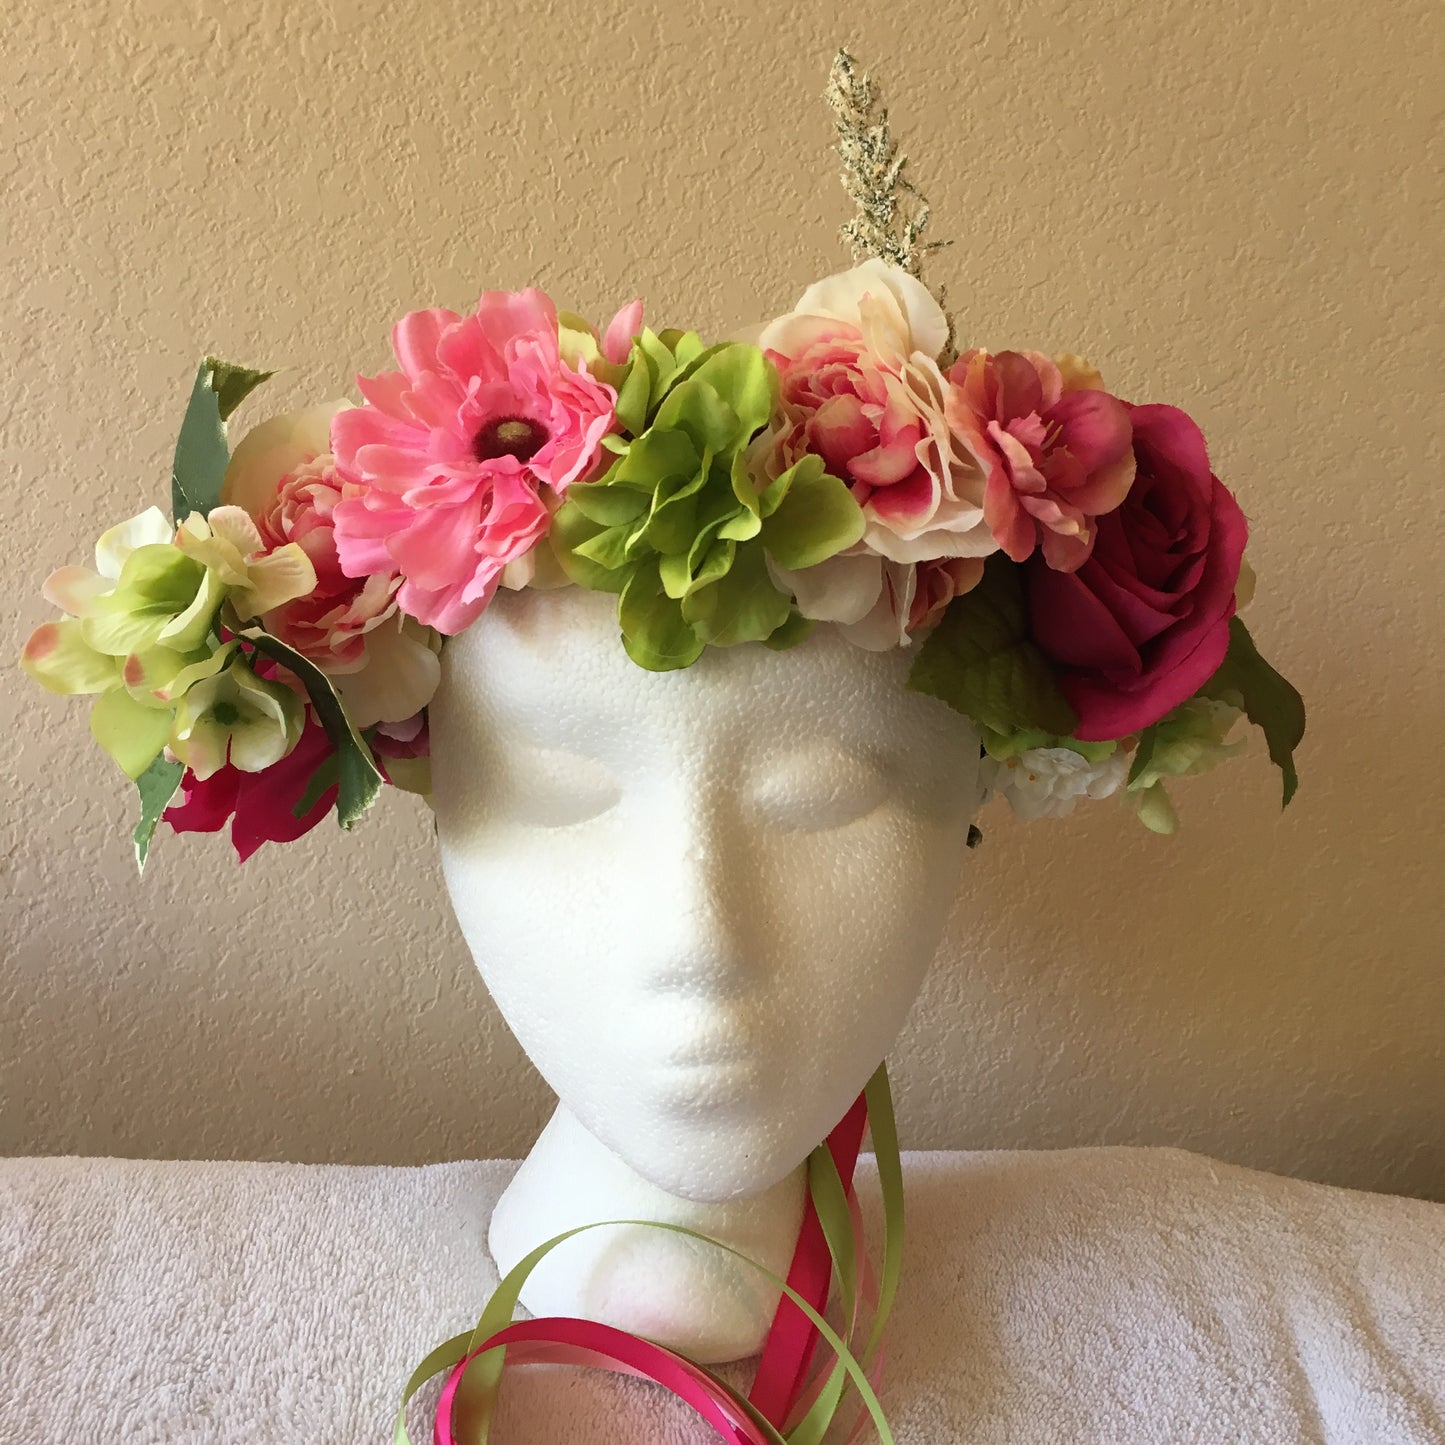 Large Wreath - Bright pink roses w/ green & pink flower accents